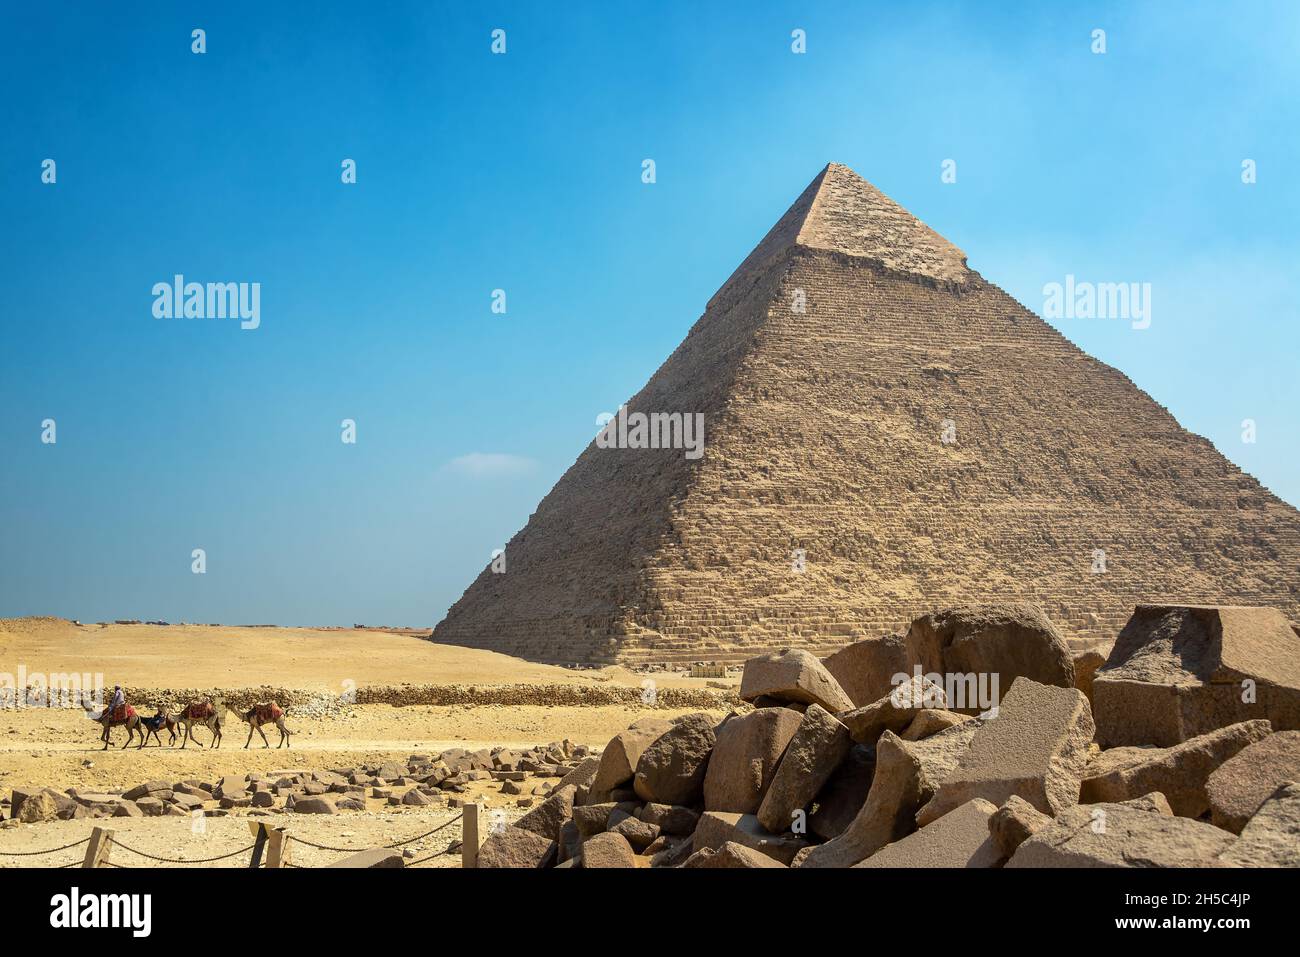 Camels passing by one of the pyramids at the Giza Pyramid Complex in Egypt Stock Photo